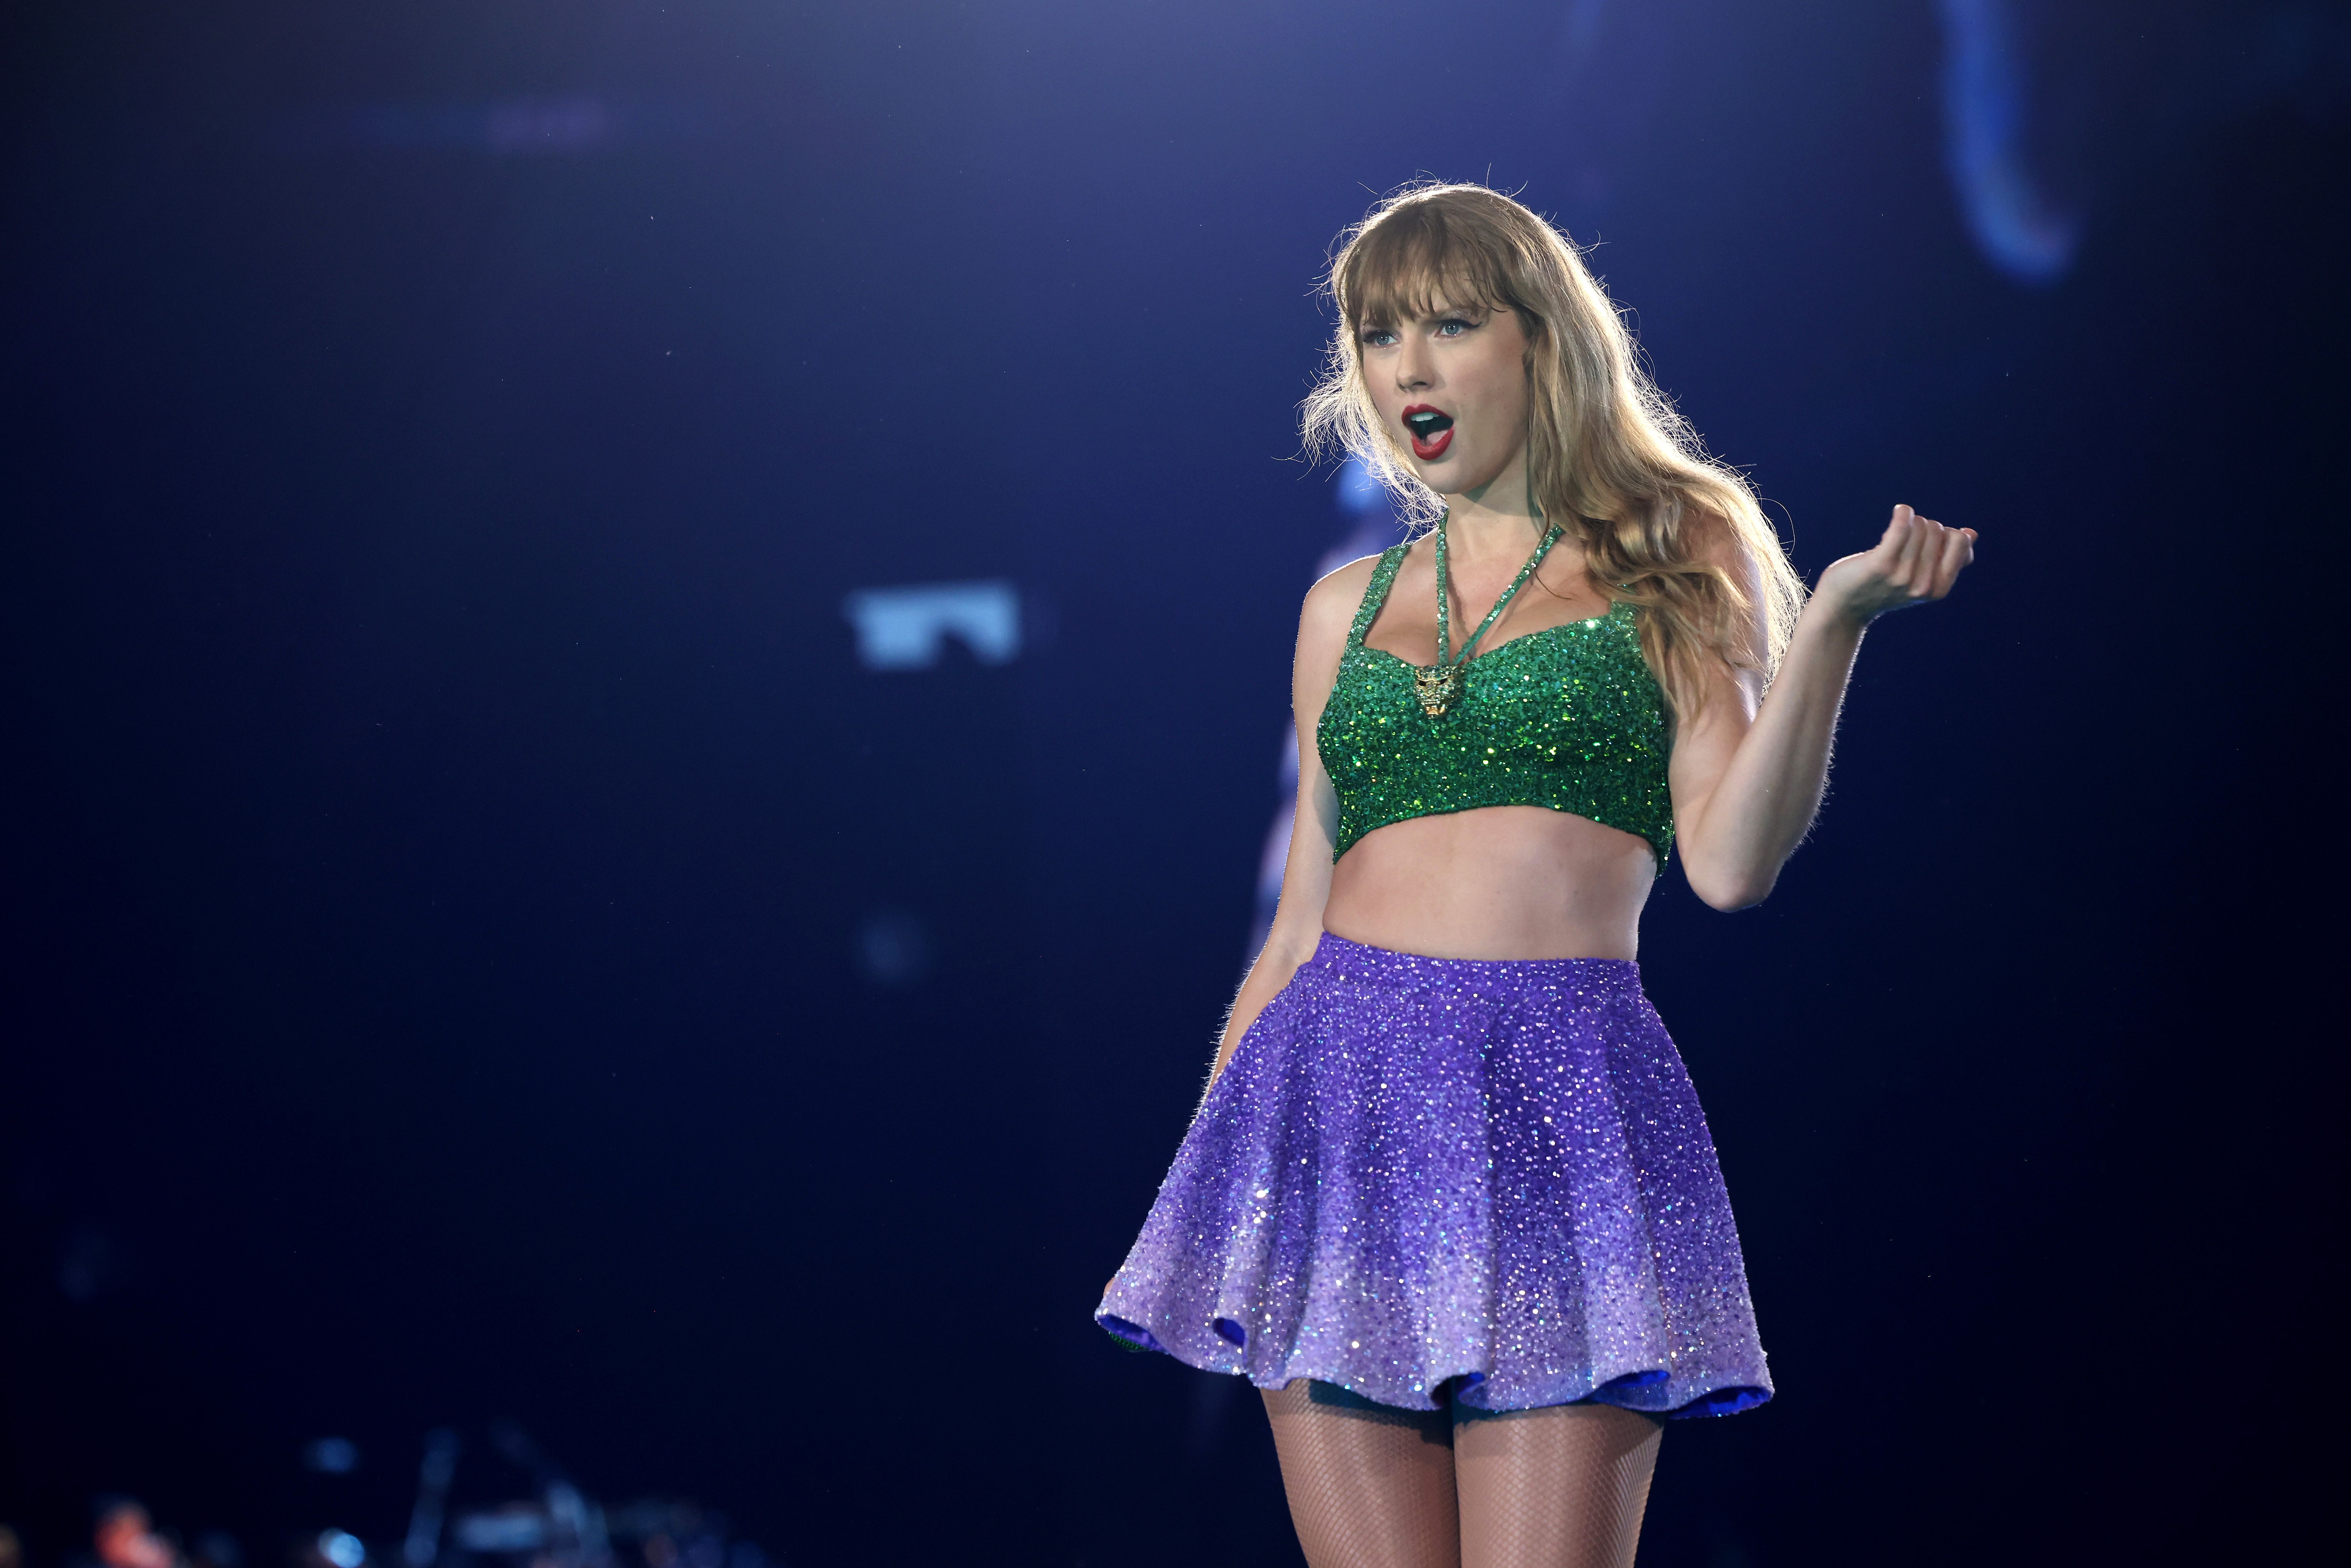 Taylor Swift, on stage at her concert, wearing a green top and purple skirt